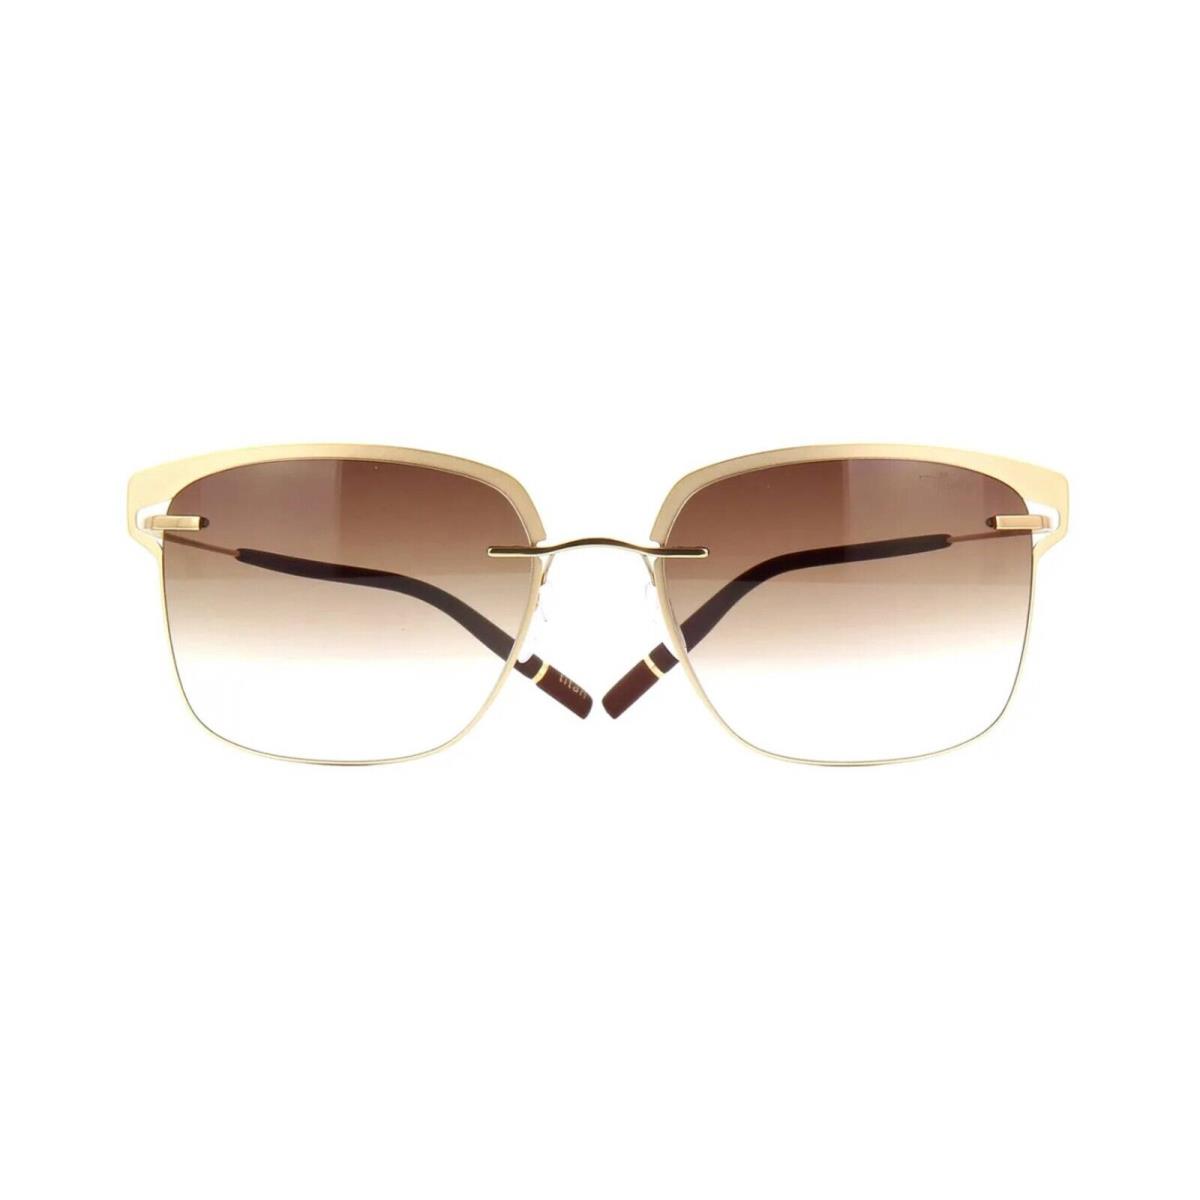 Silhouette Titan Accent Shades 8718 Gold/brown Shaded 7530 Sunglasses - Frame: Gold, Lens: Brown Shaded